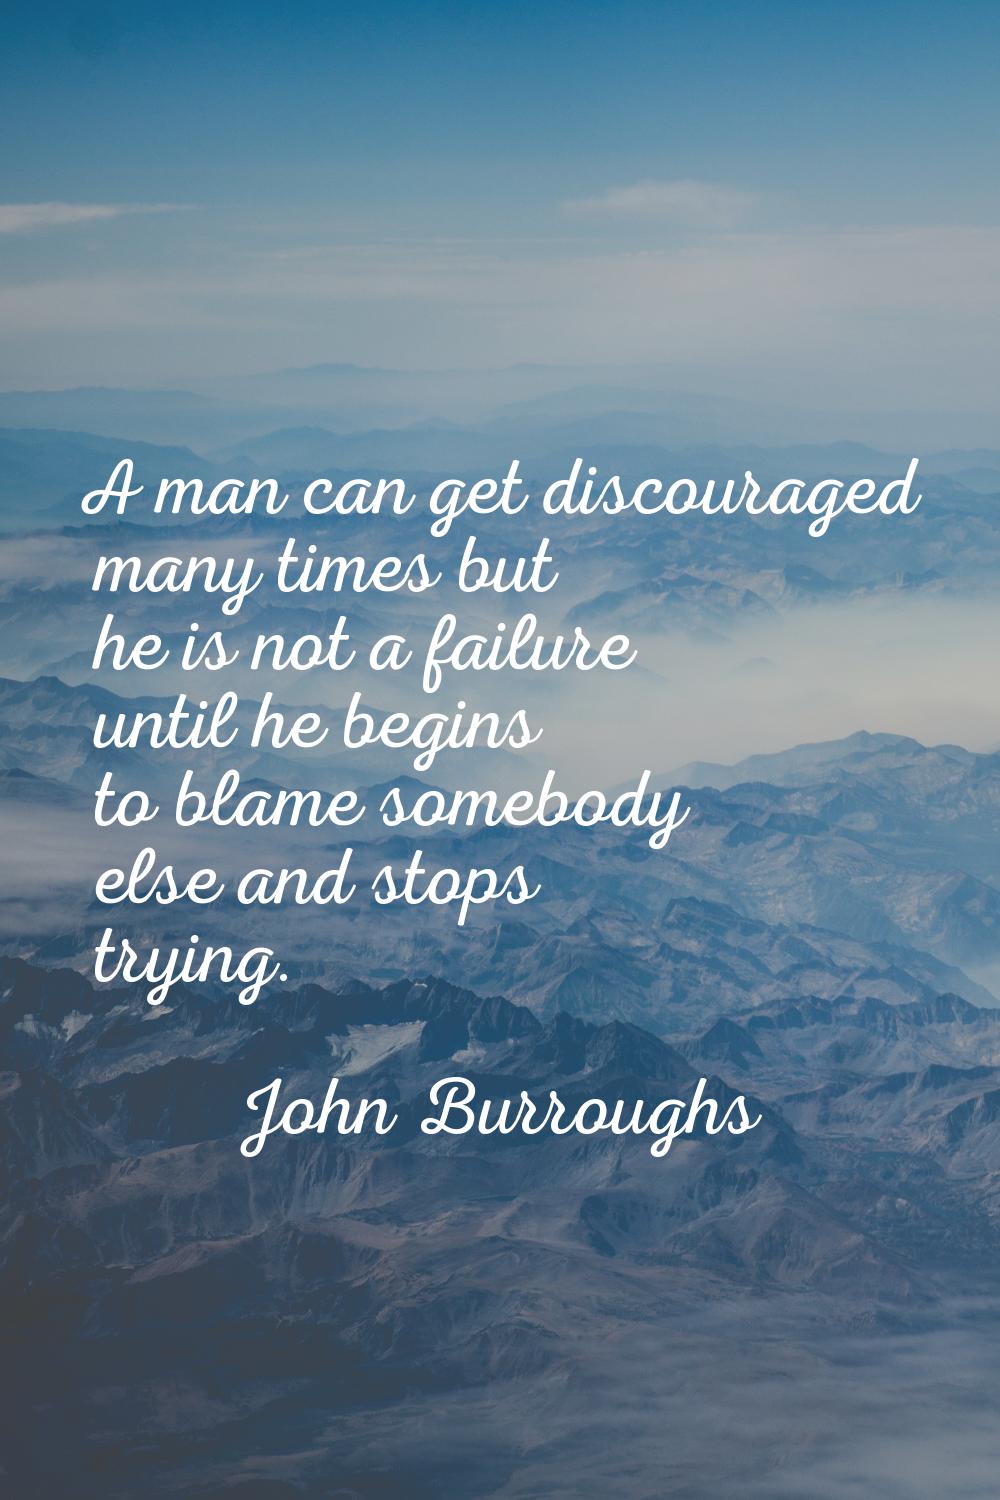 A man can get discouraged many times but he is not a failure until he begins to blame somebody else